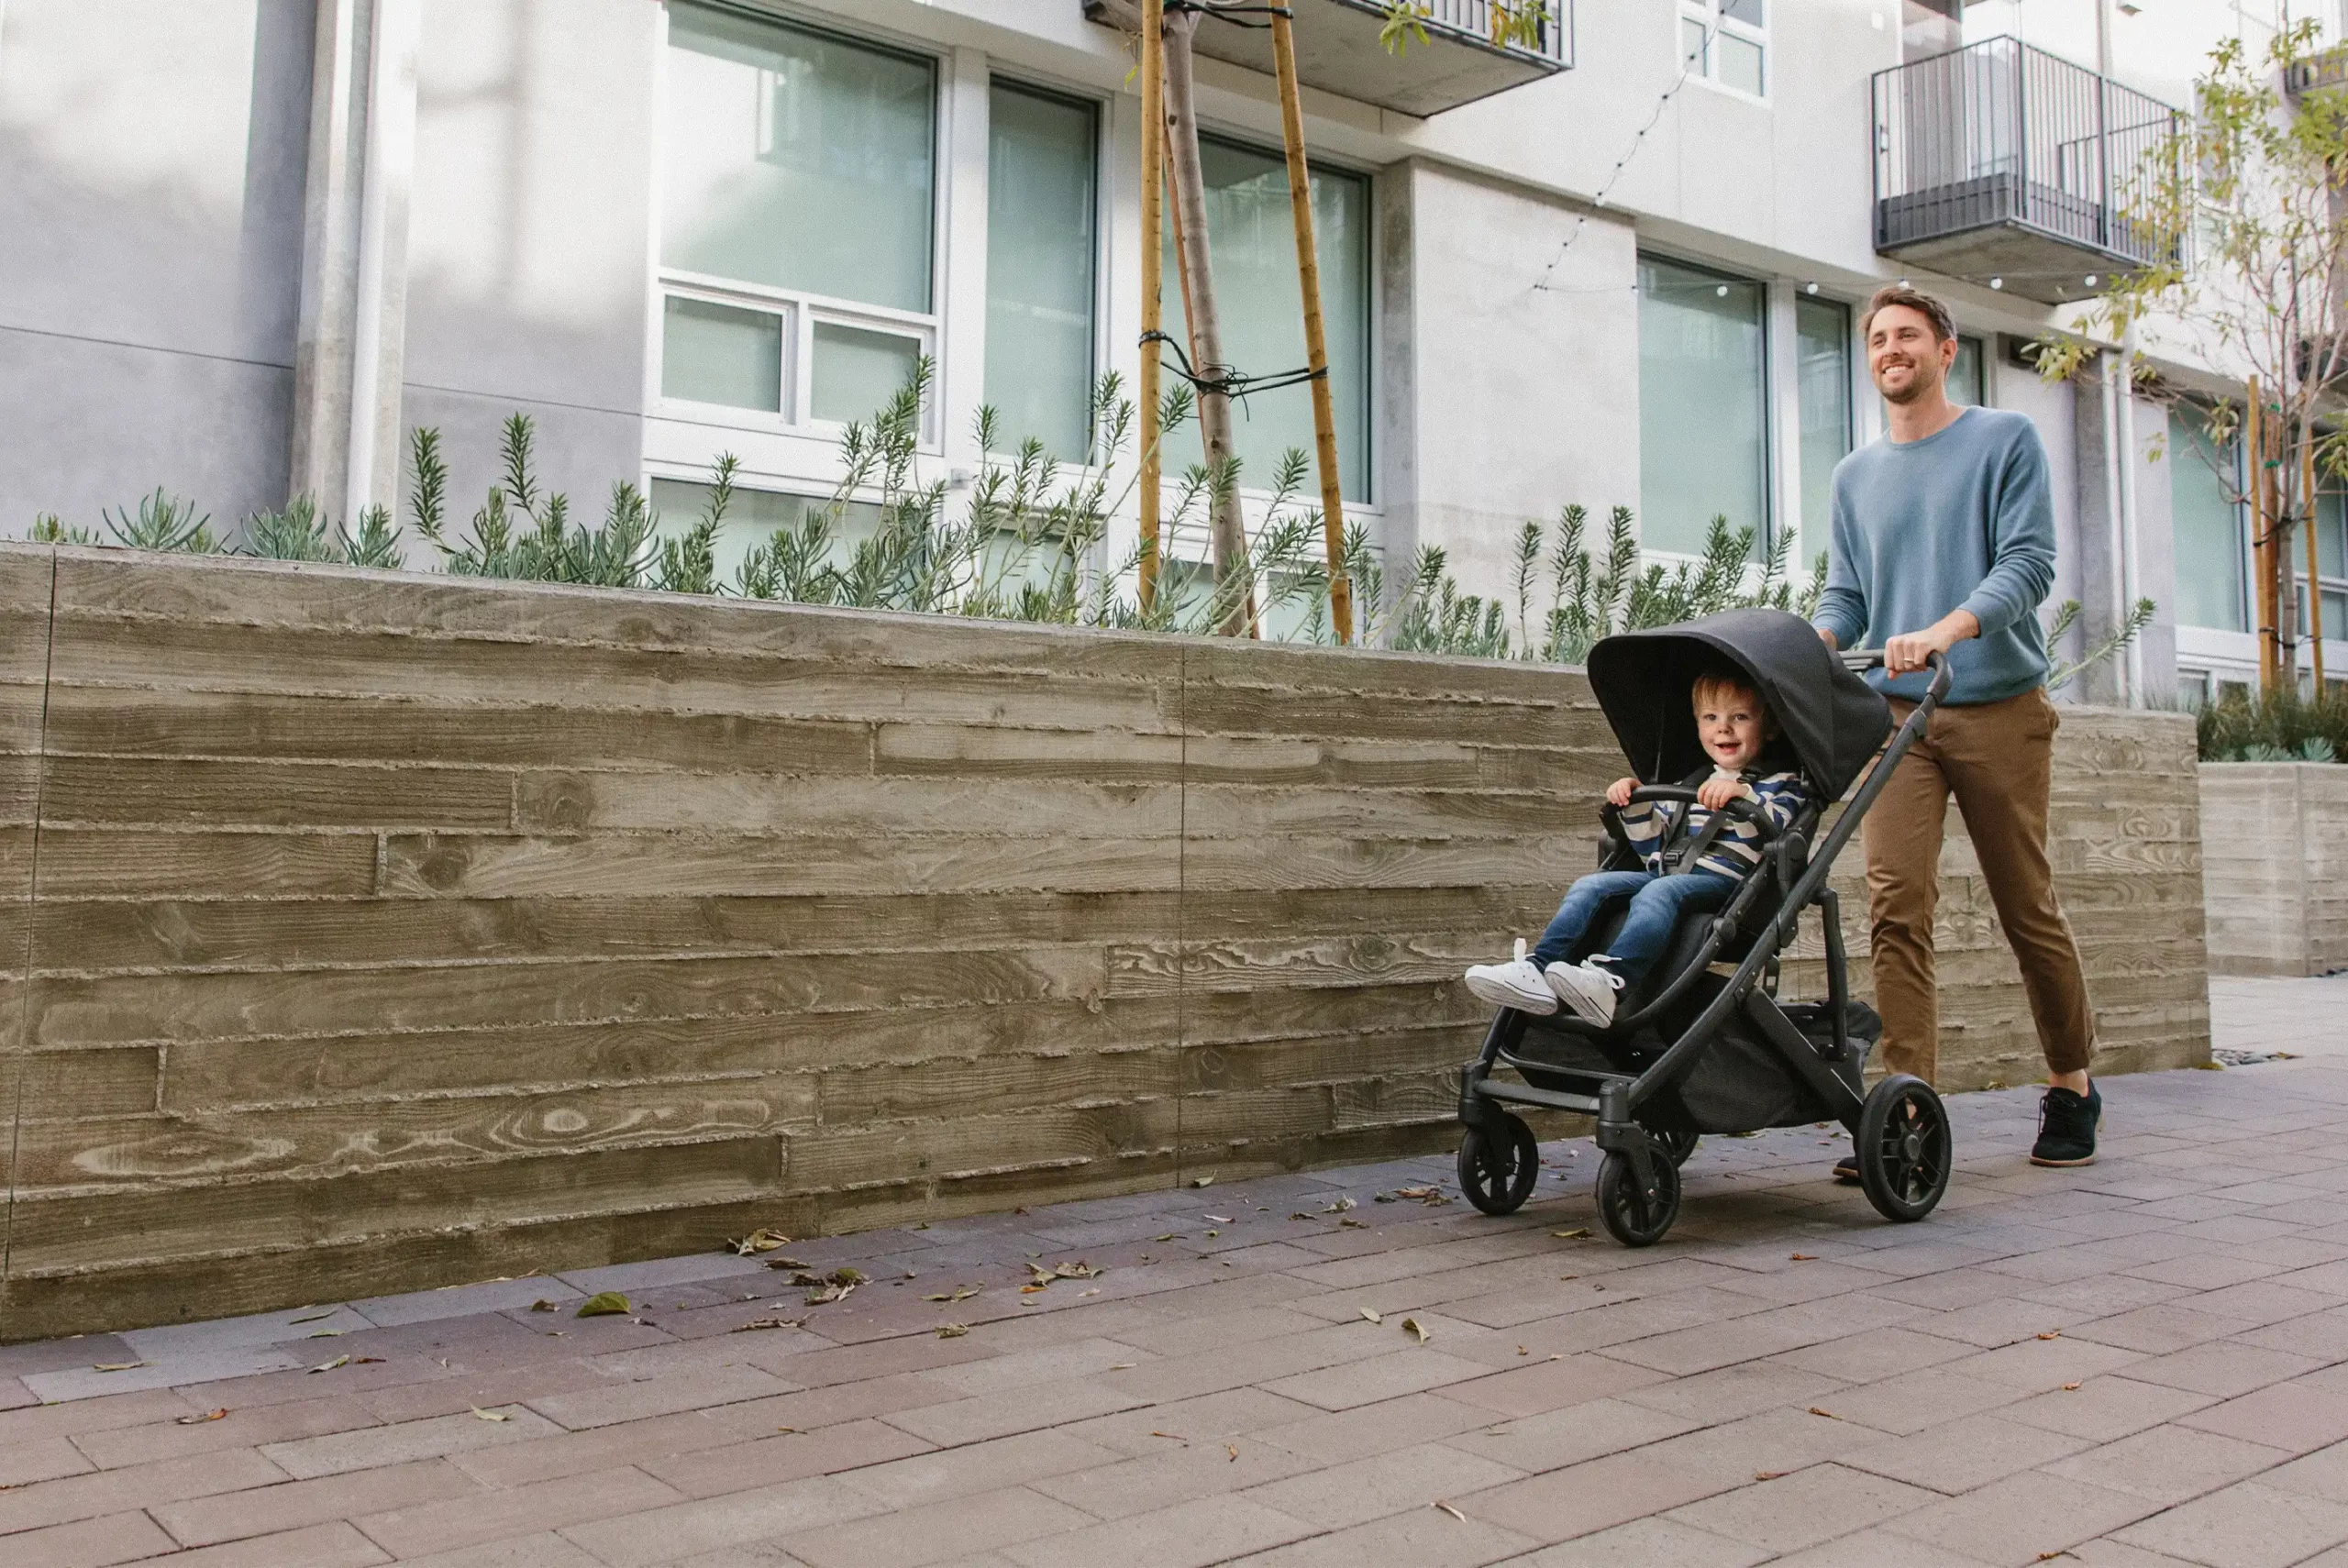 A child is pushed by a smiling woman along a brick path while staying comfortably secure due to the Cruz V2's all-wheel suspension + independent shocks